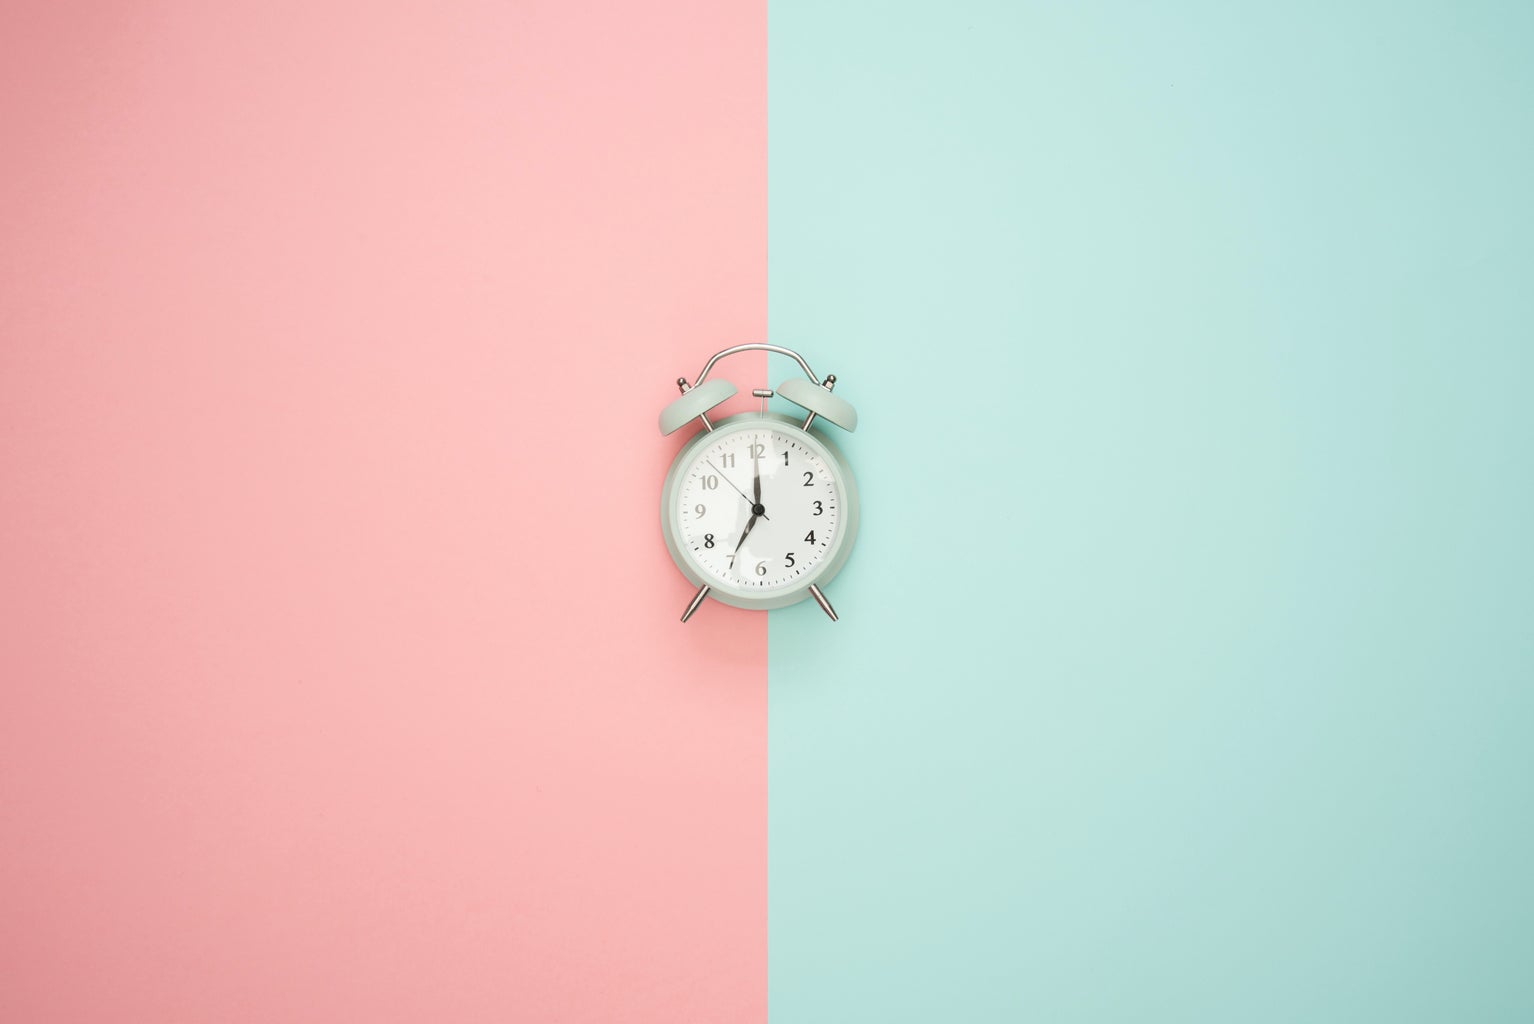 Clock on two toned background